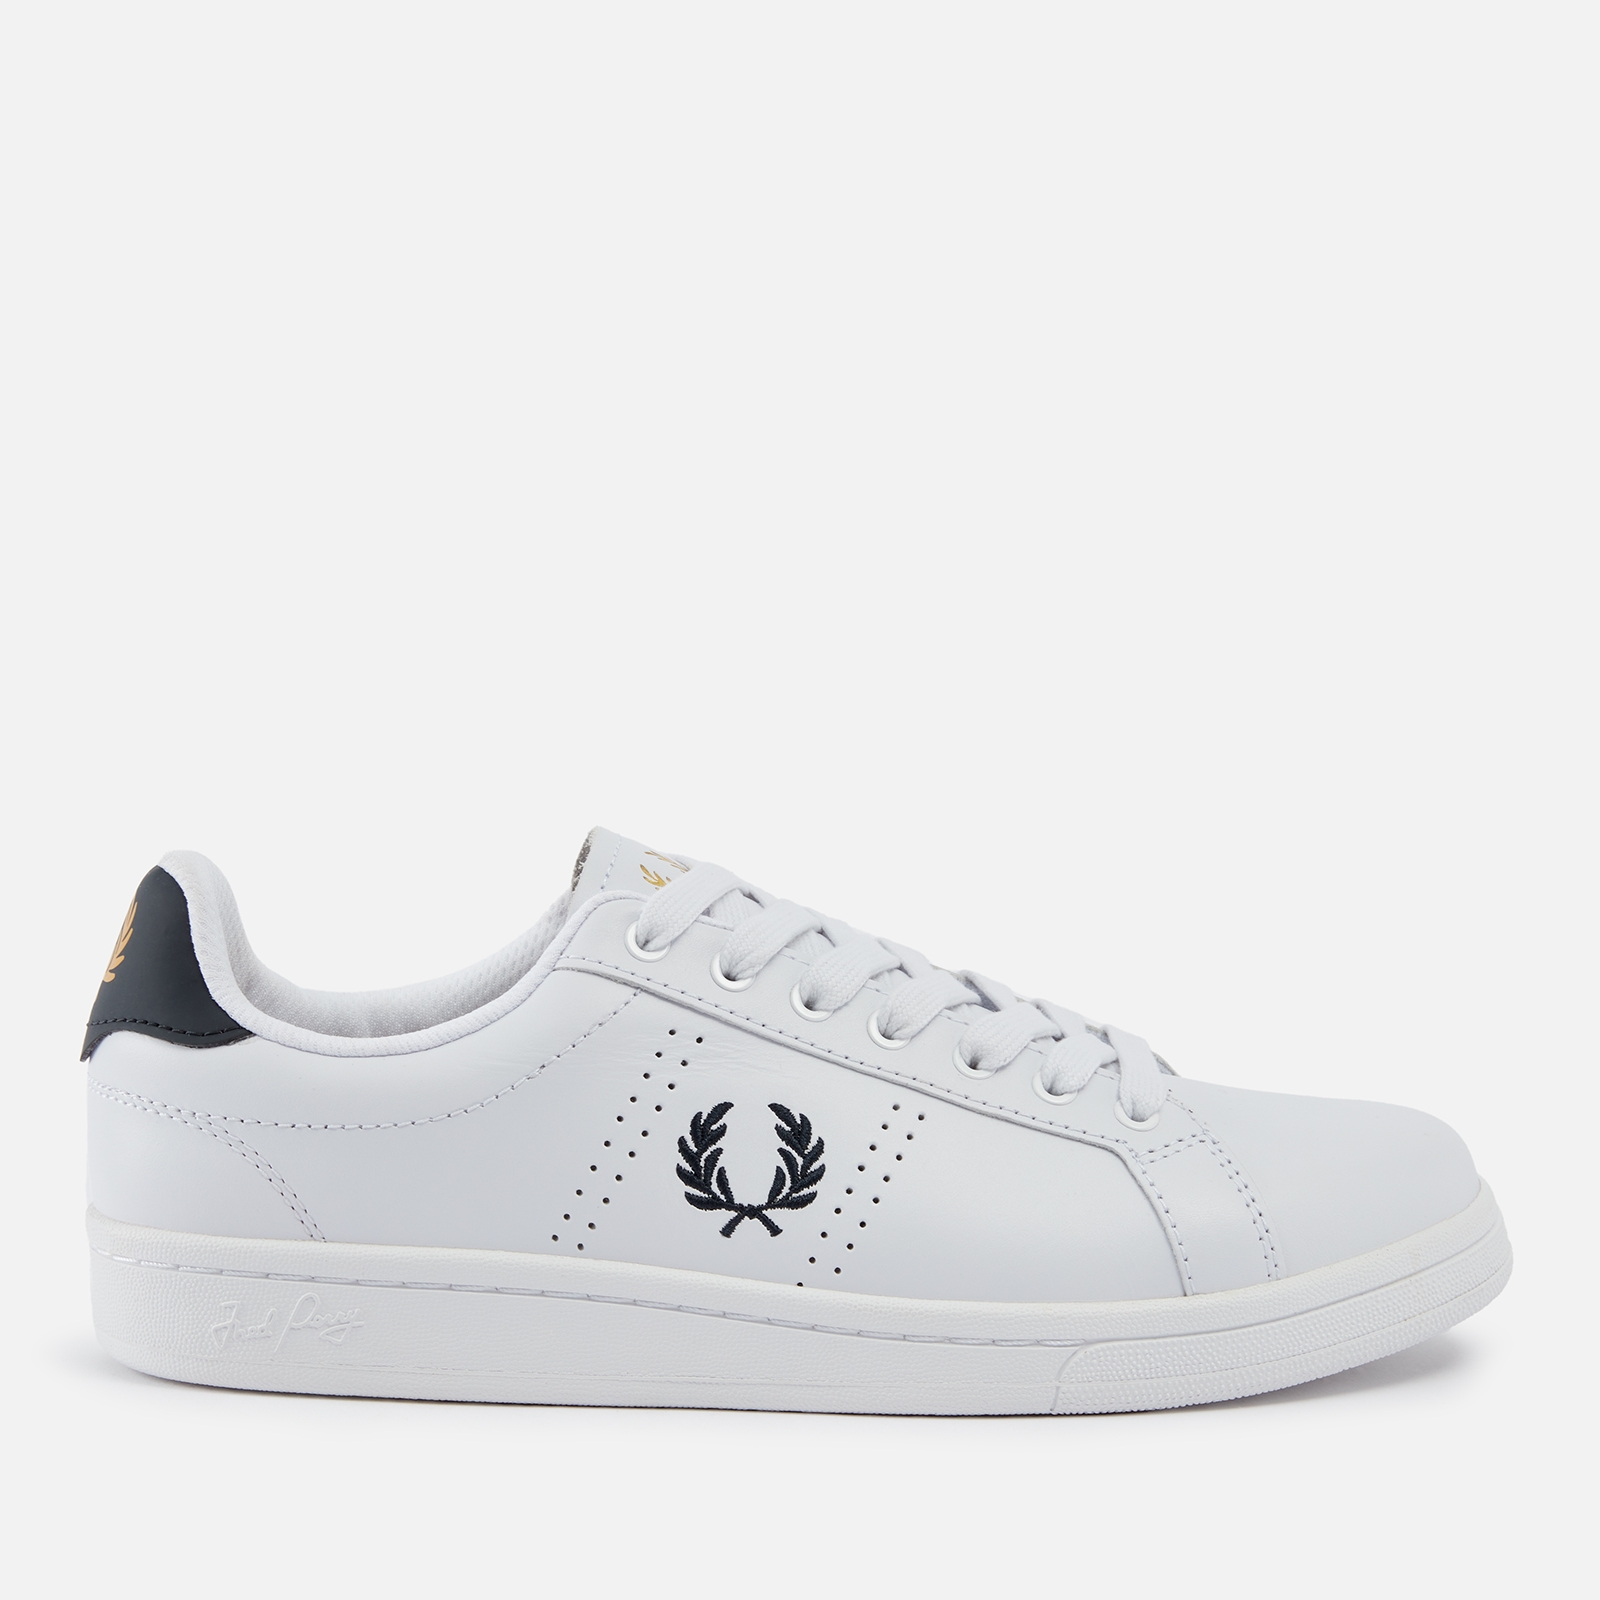 Fred Perry Men's B721 Leather Trainers - UK 7